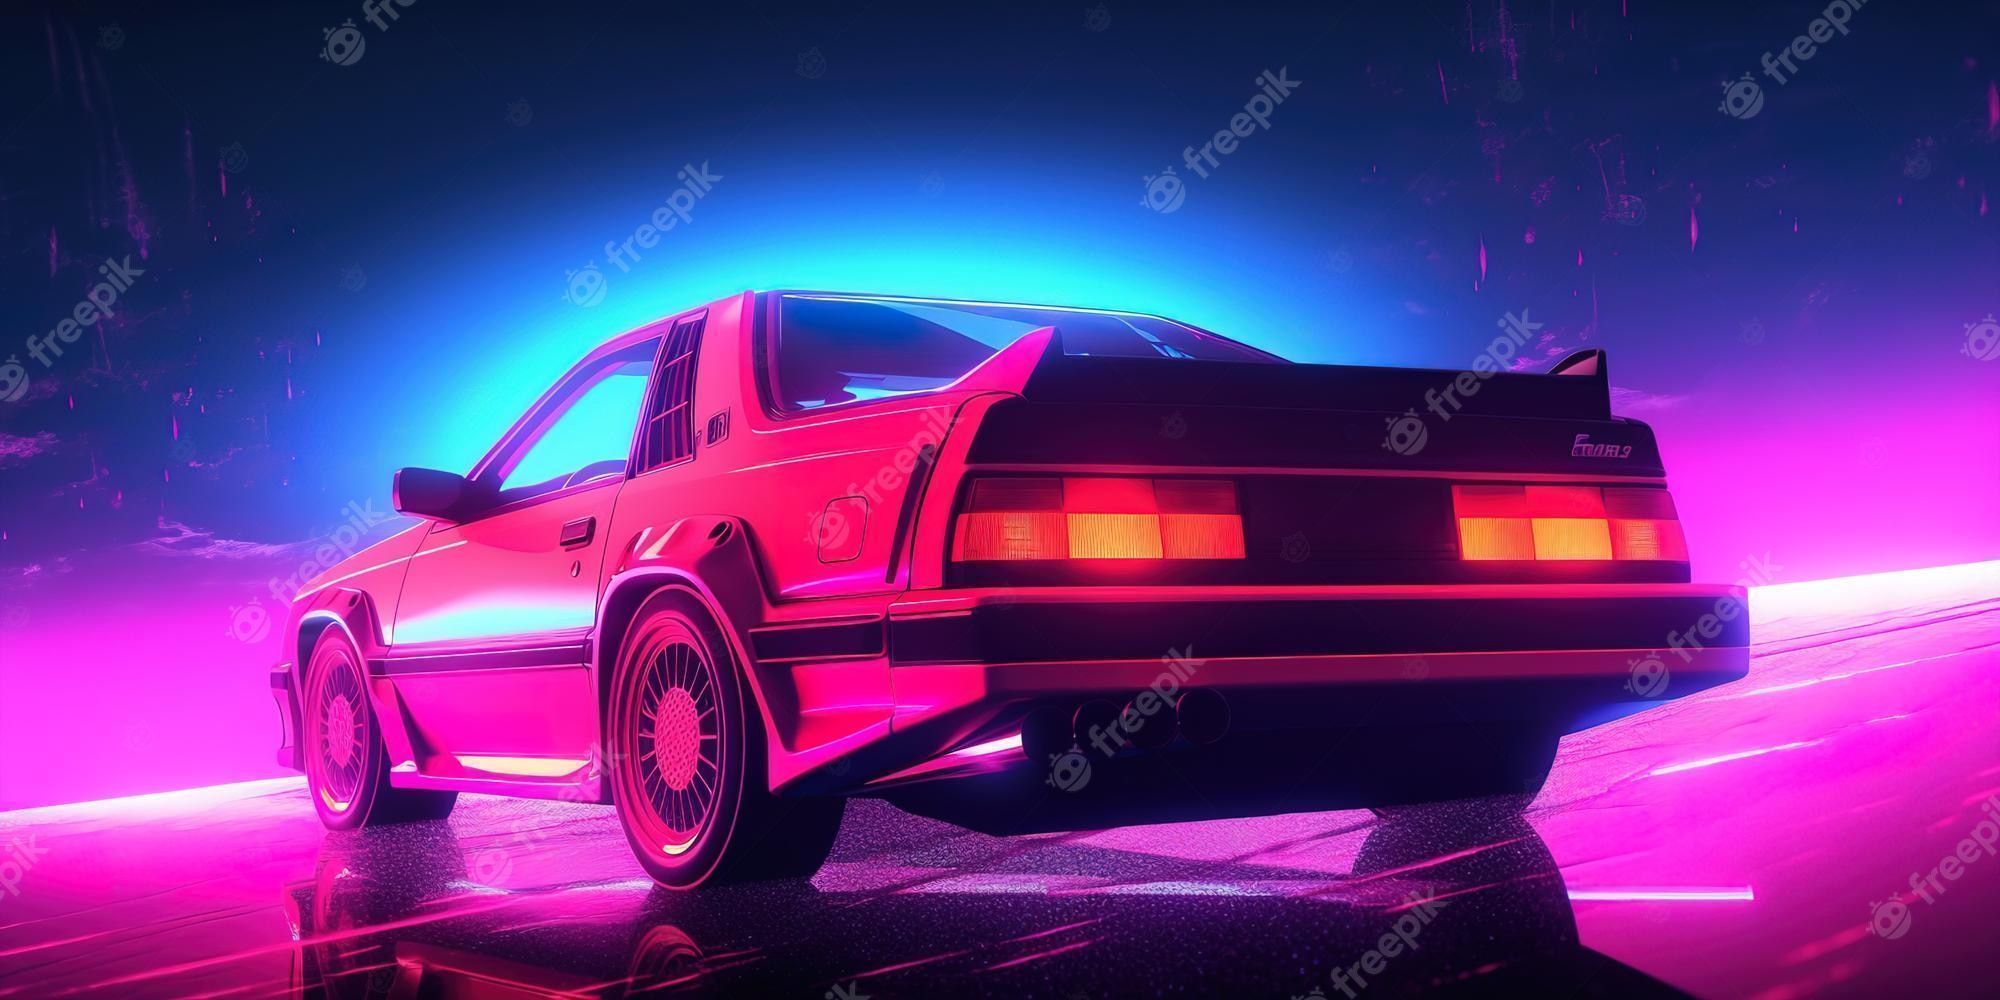 3d illustration of a sports car in a neon environment - Nissan Skyline